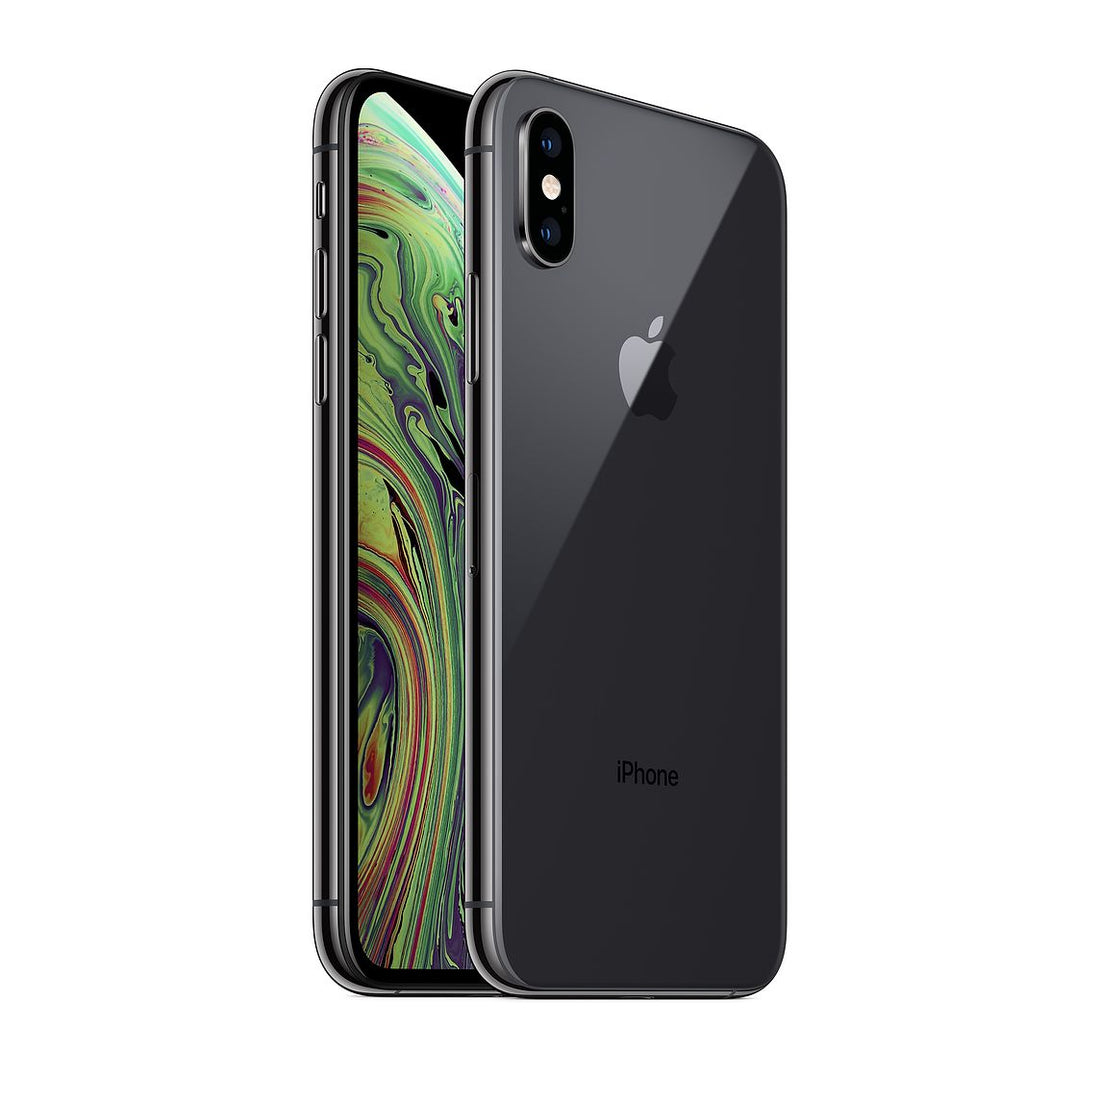 Apple iPhone XS 256GB (Unlocked) - Space Gray (Pre-Owned)